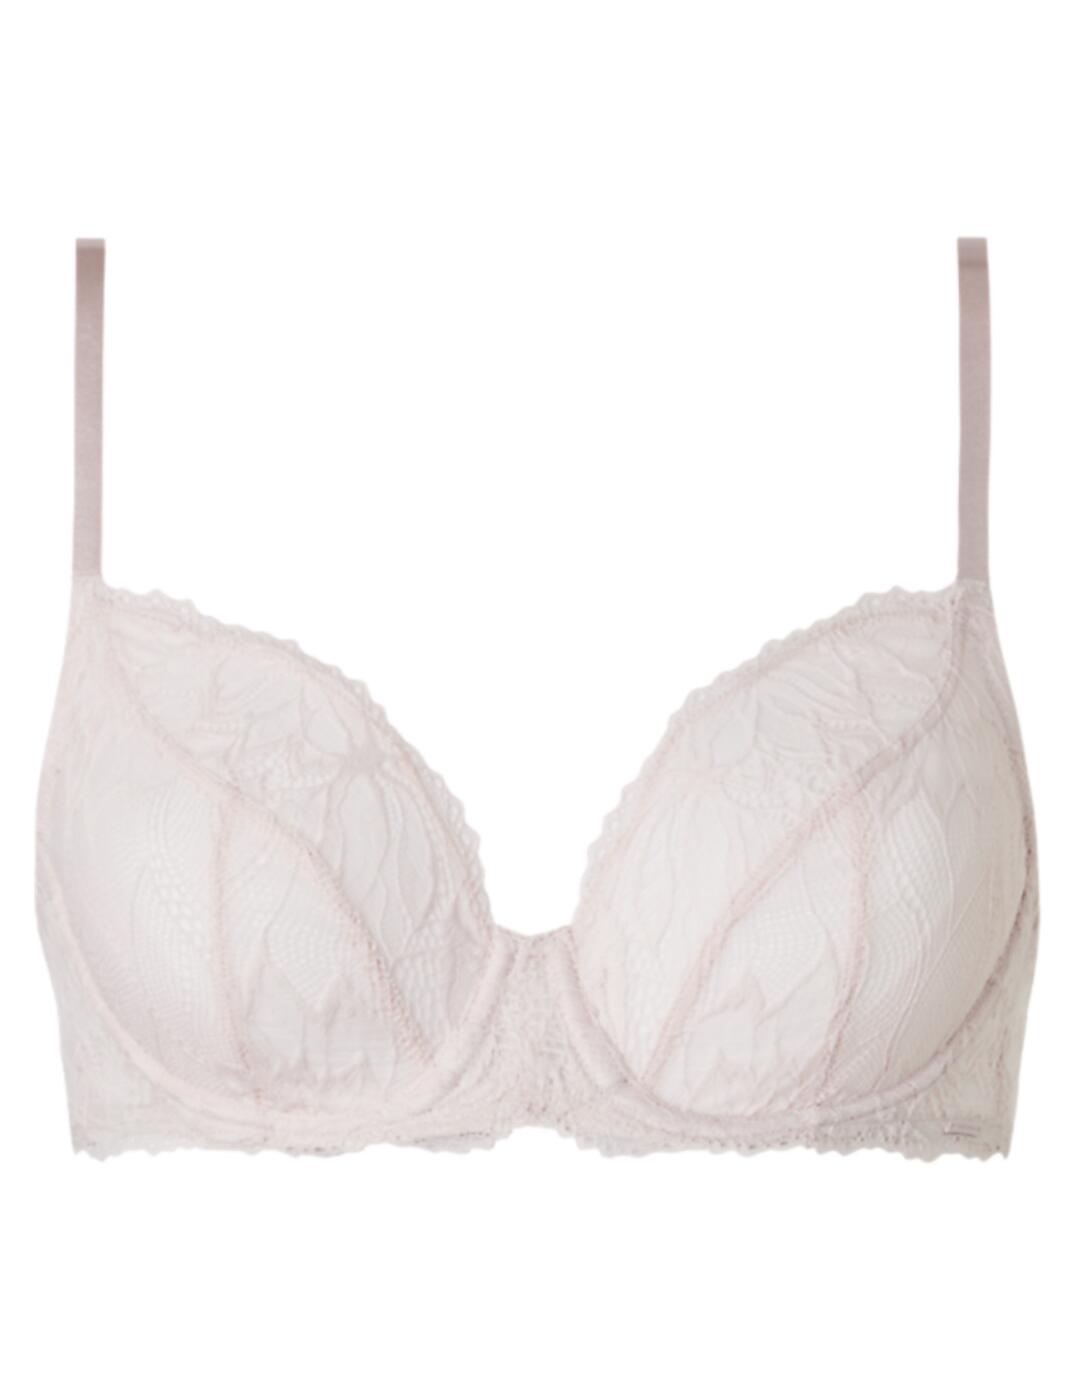 CALVIN KLEIN - Women's bralette with padded cups - White - 000QF7186E100